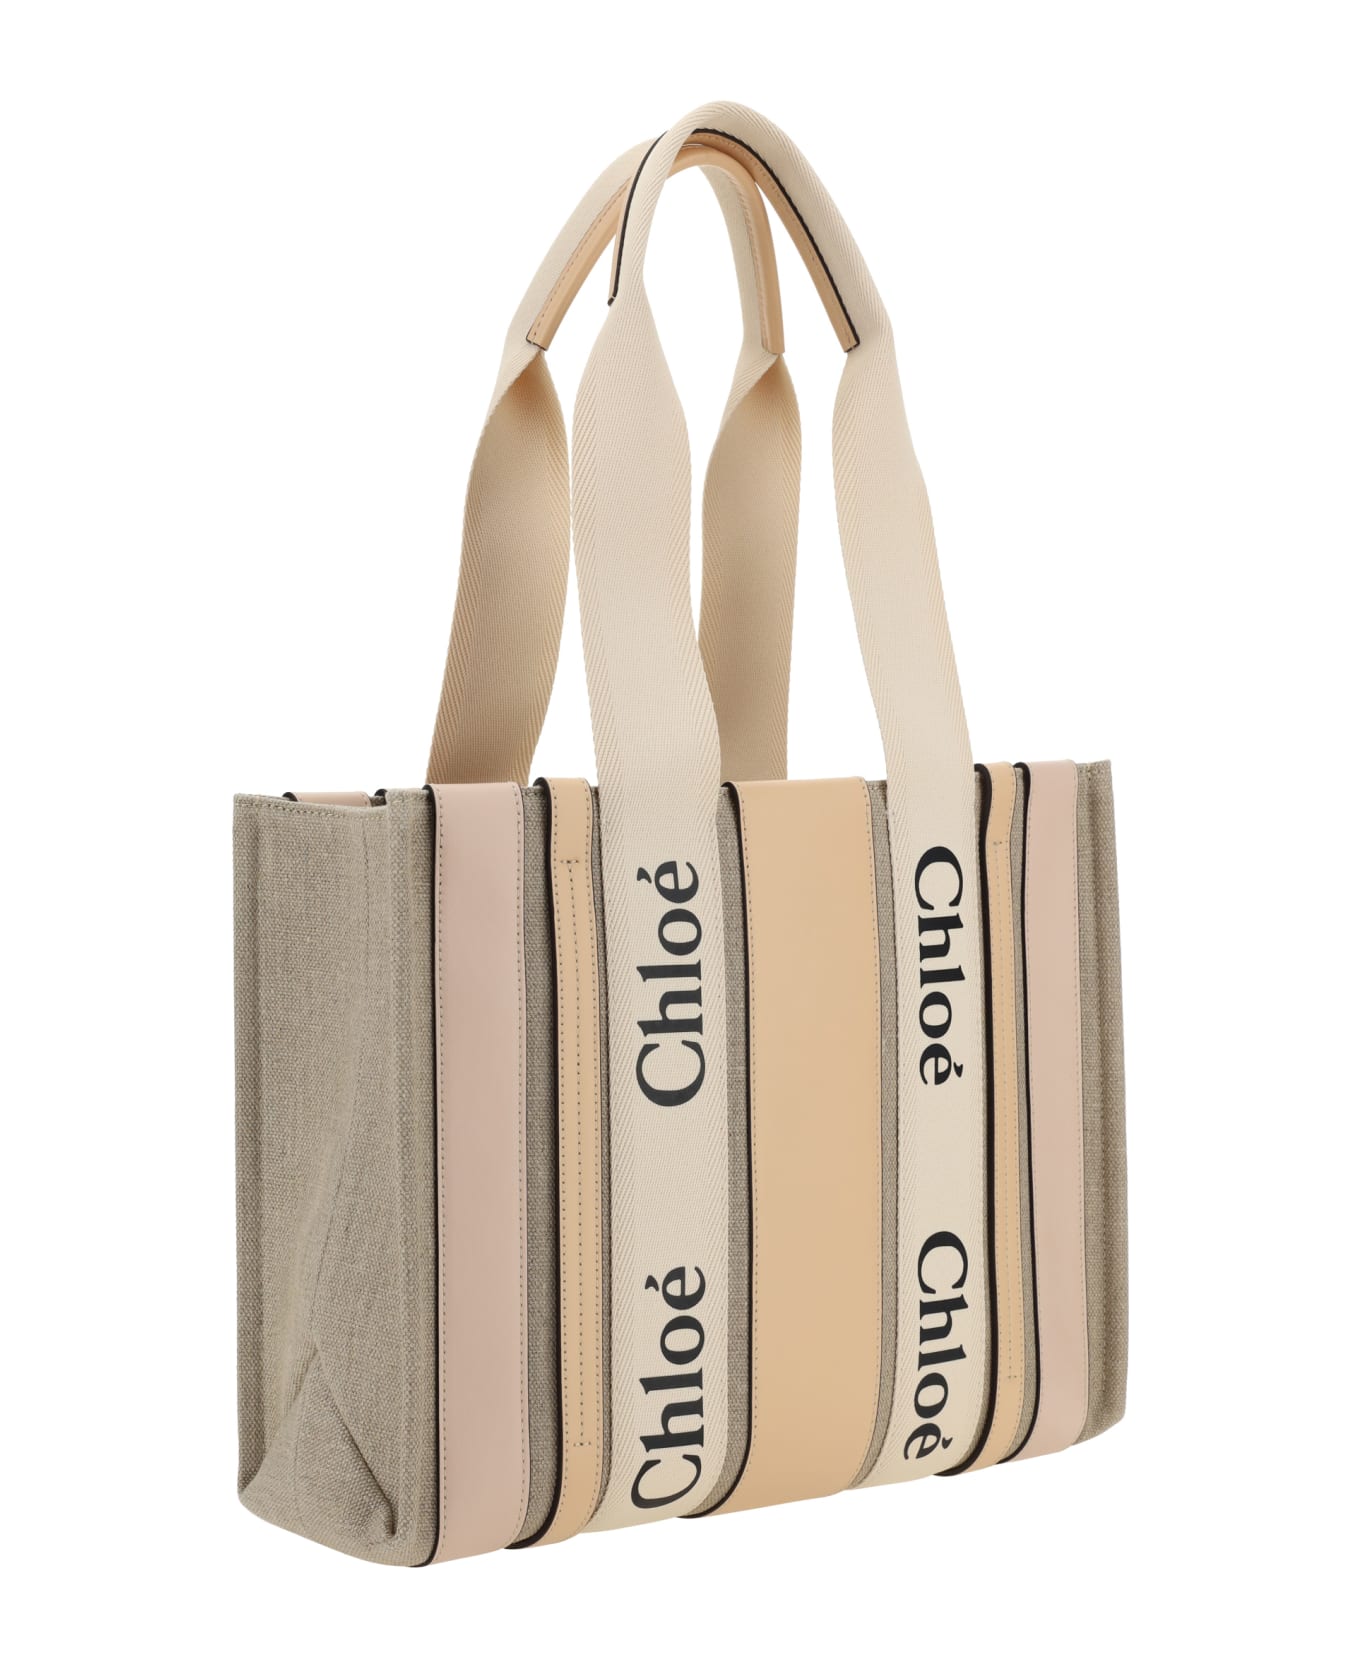 Chloé Woody Medium Tote Bag - Cement Pink トートバッグ